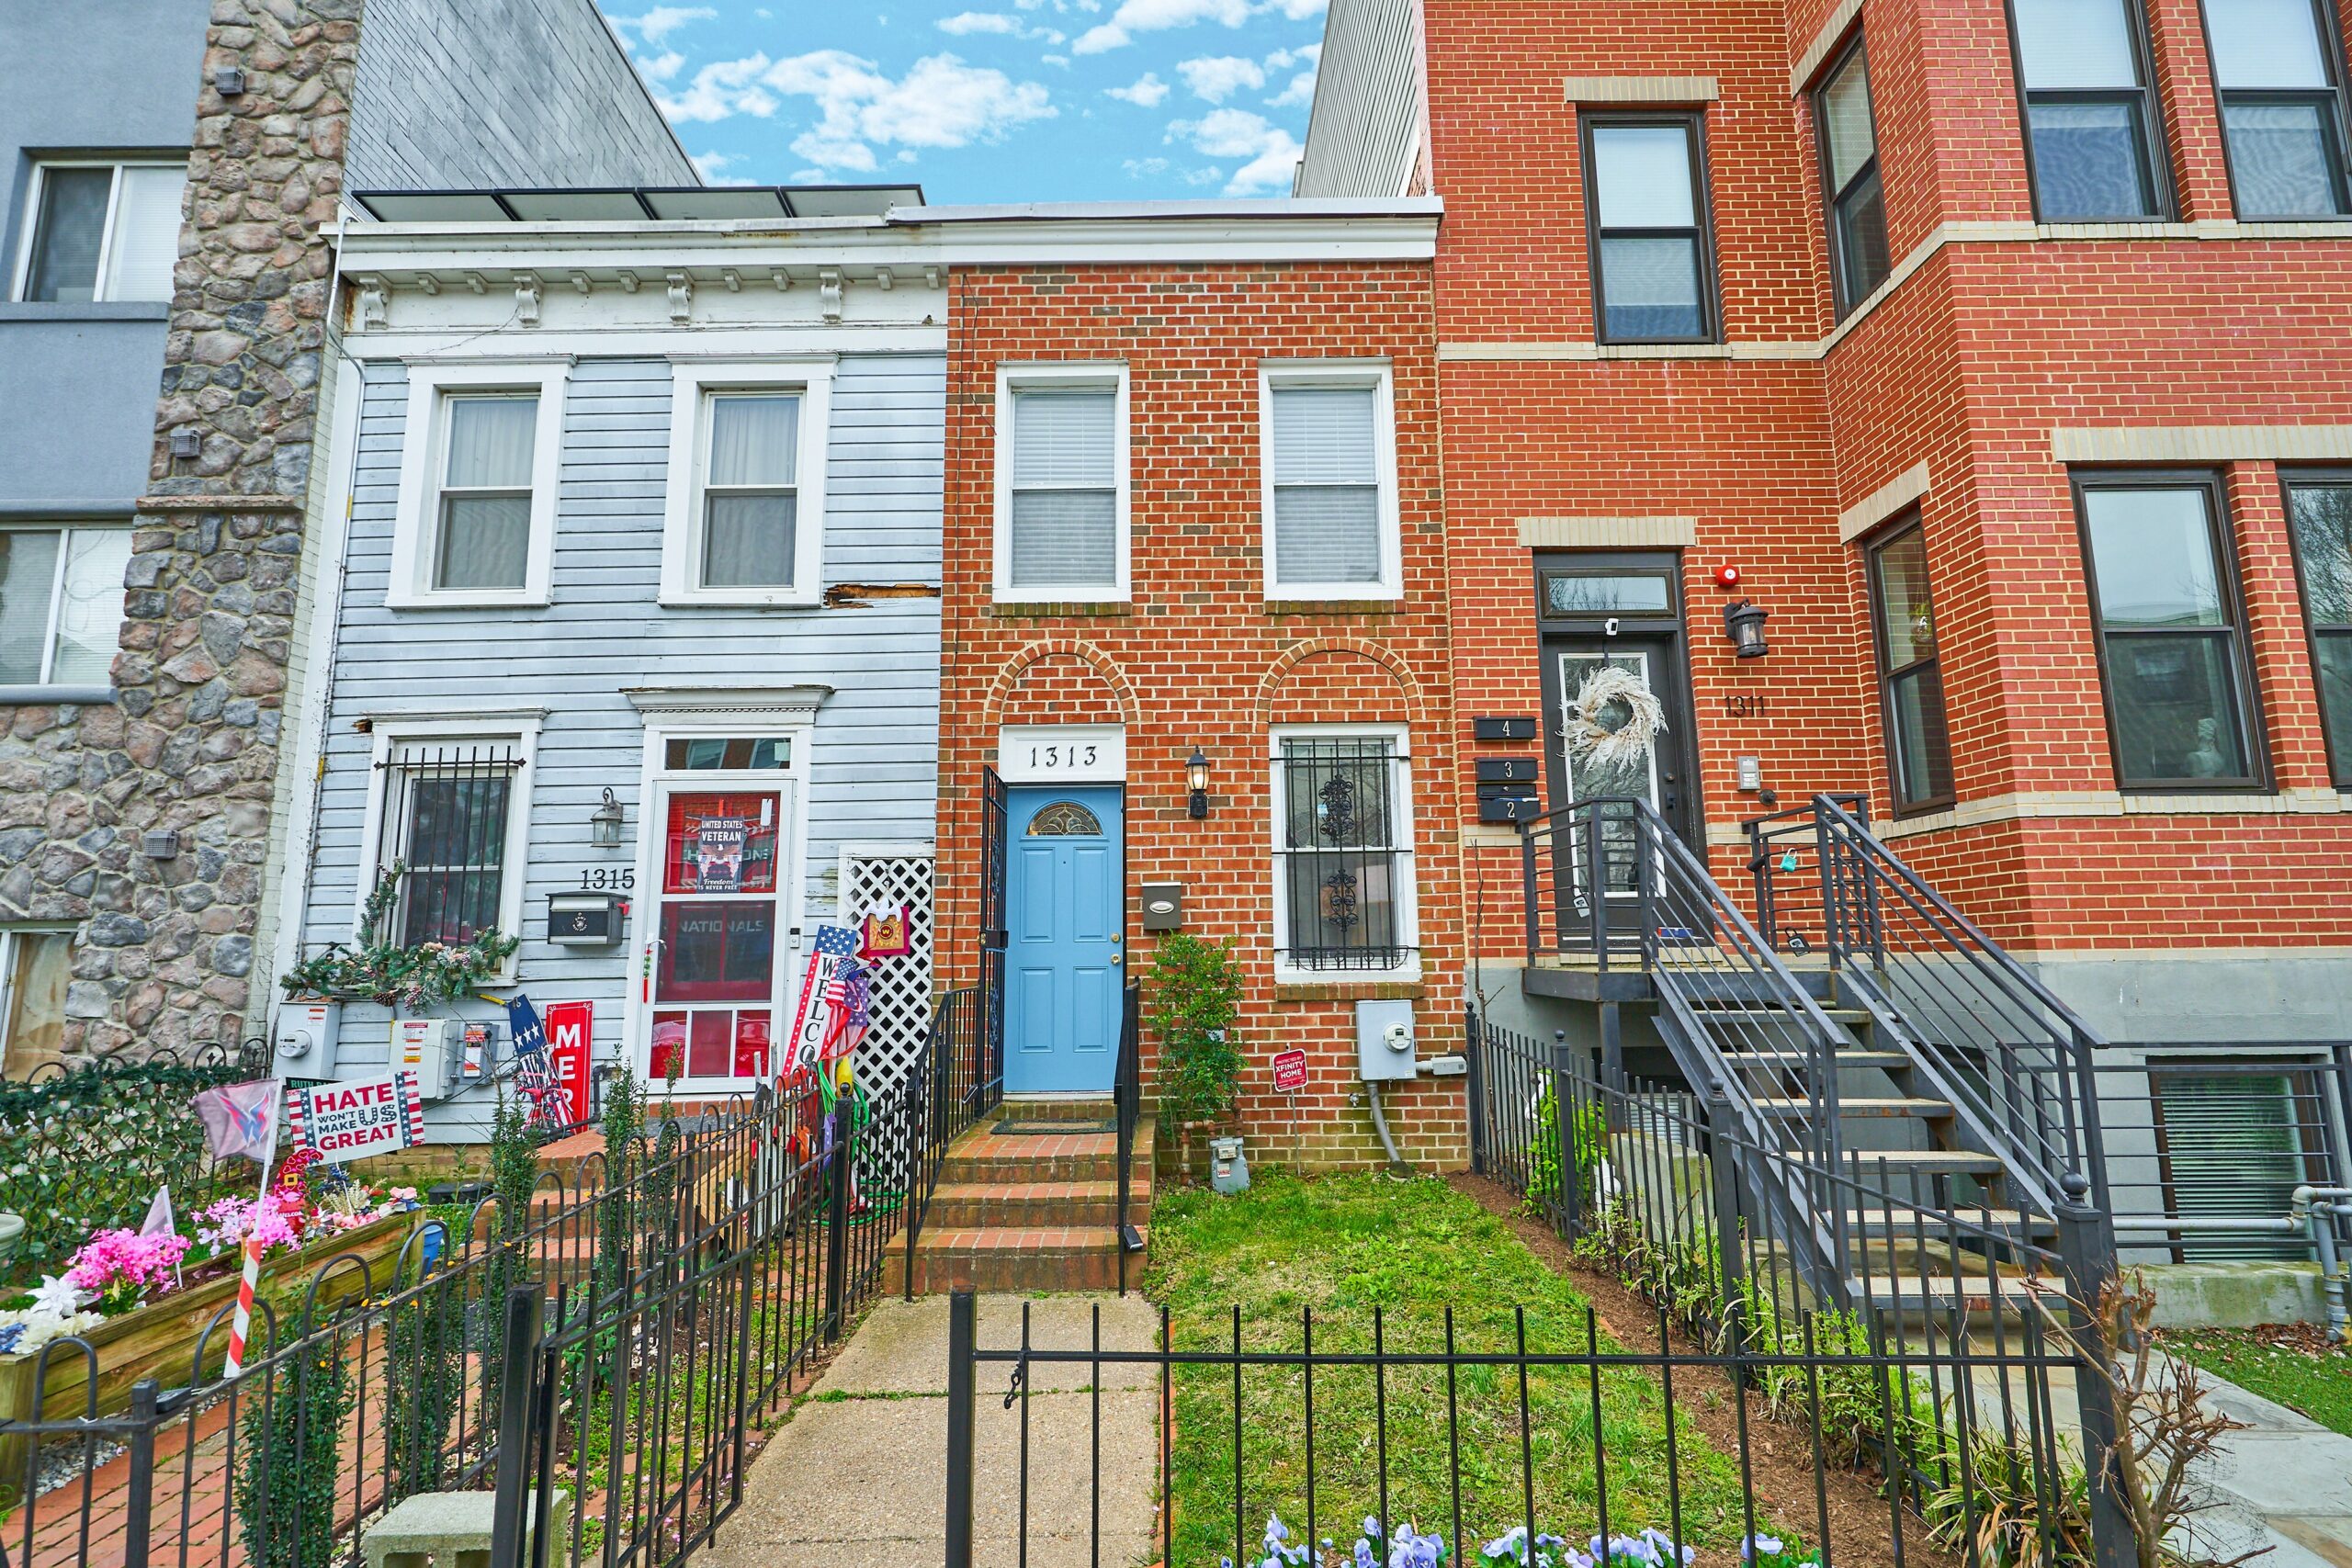 Professional exterior photo of 1313 K Street SE, Washington, DC - showing a brick-front 2-story townhome with fenced in front garden and entrance and sky blue front door